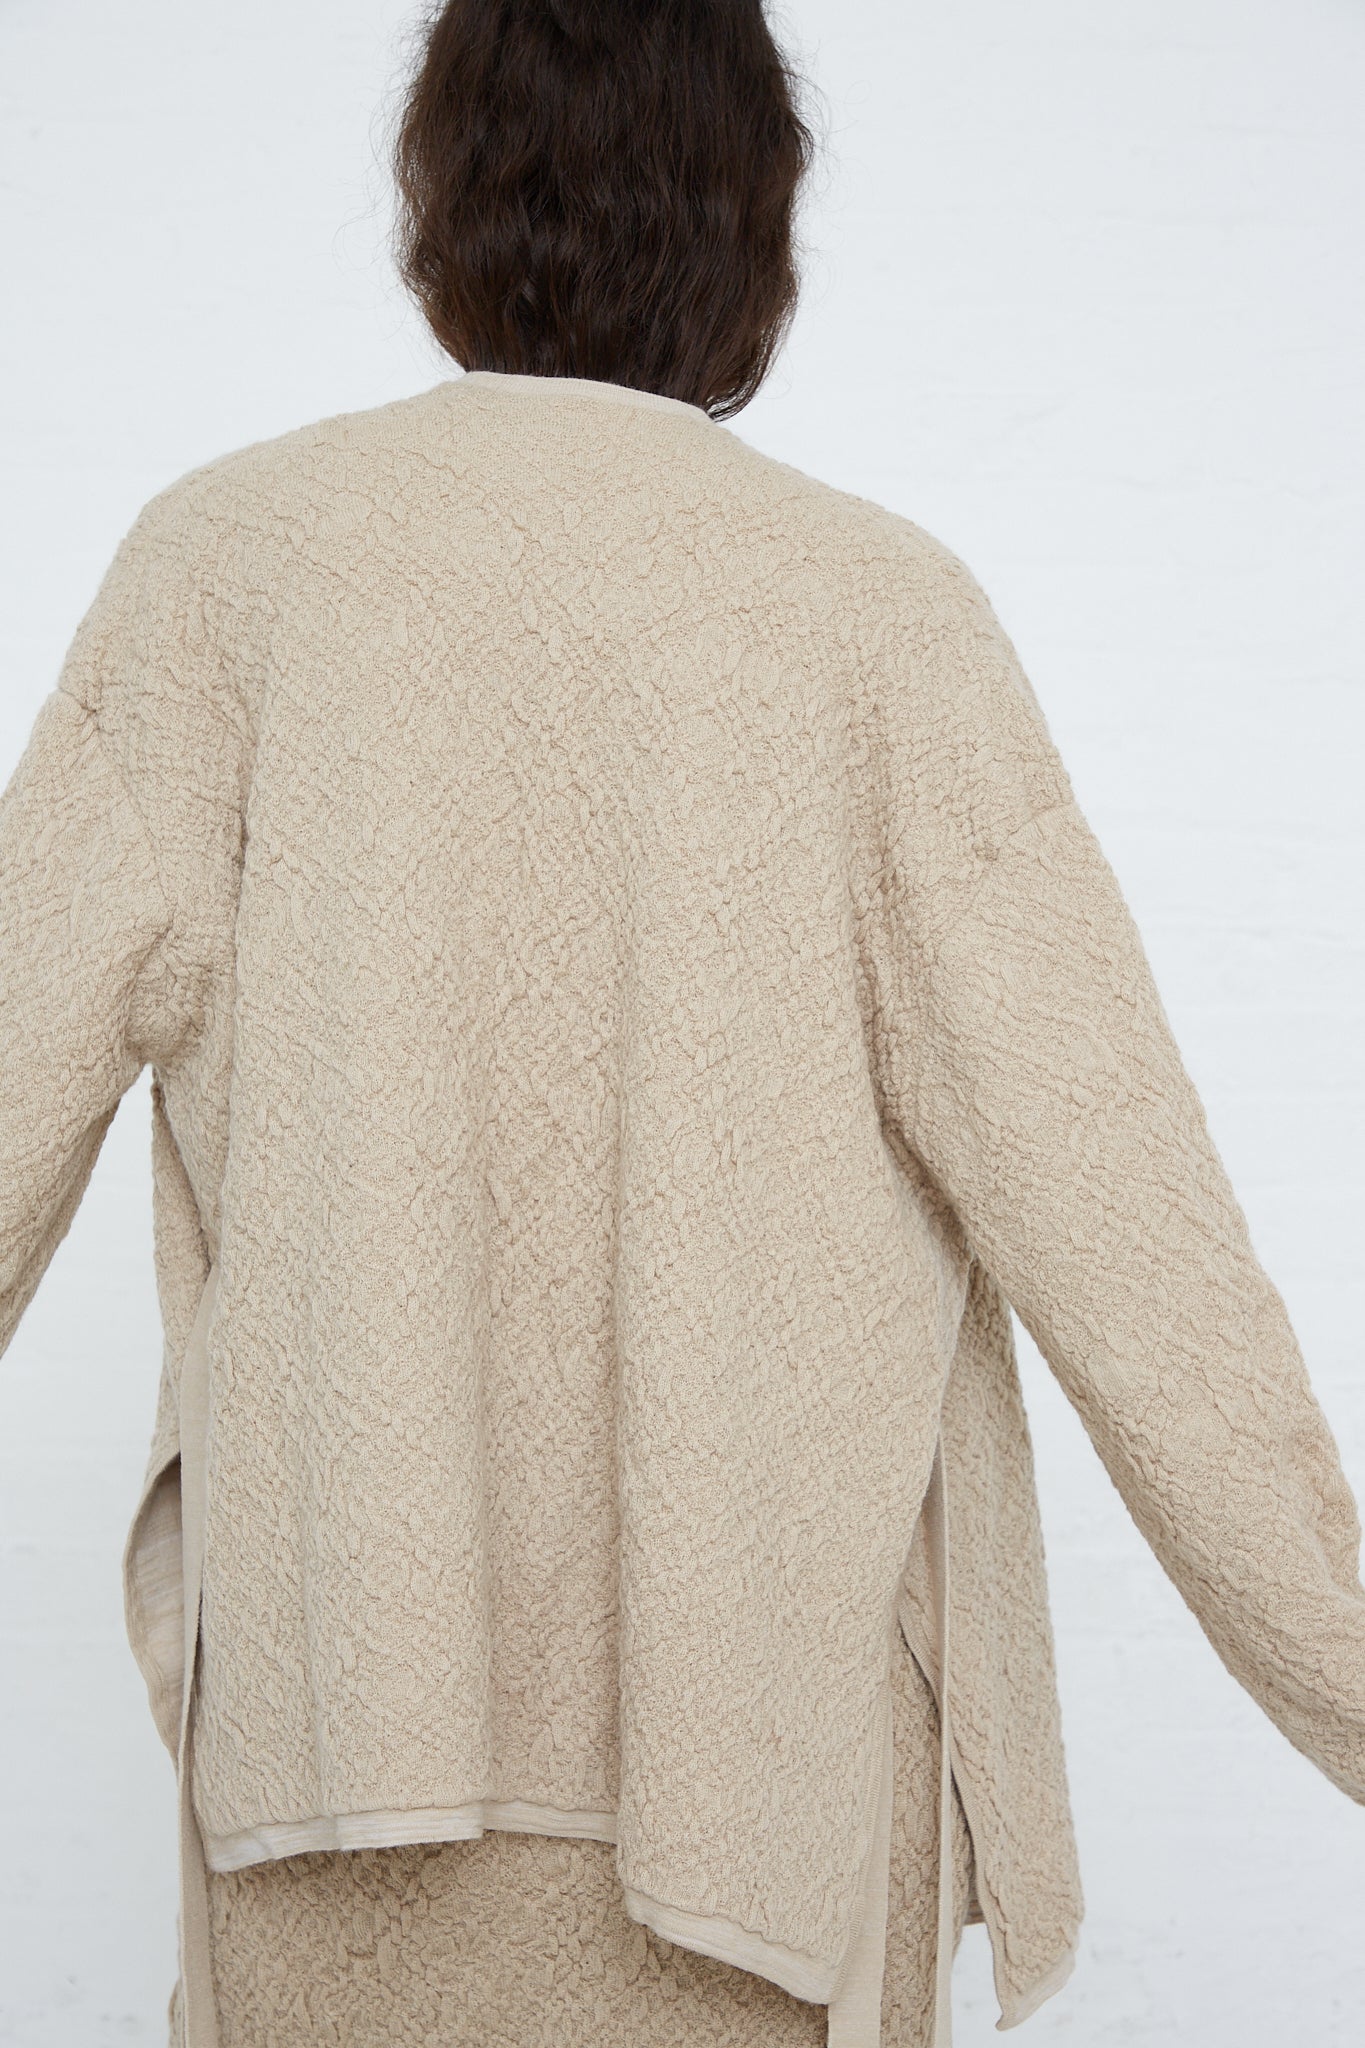 The back of a woman wearing an open Lauren Manoogian Alpaca Gauze Cardigan in Antique made from sustainable knit alpaca.